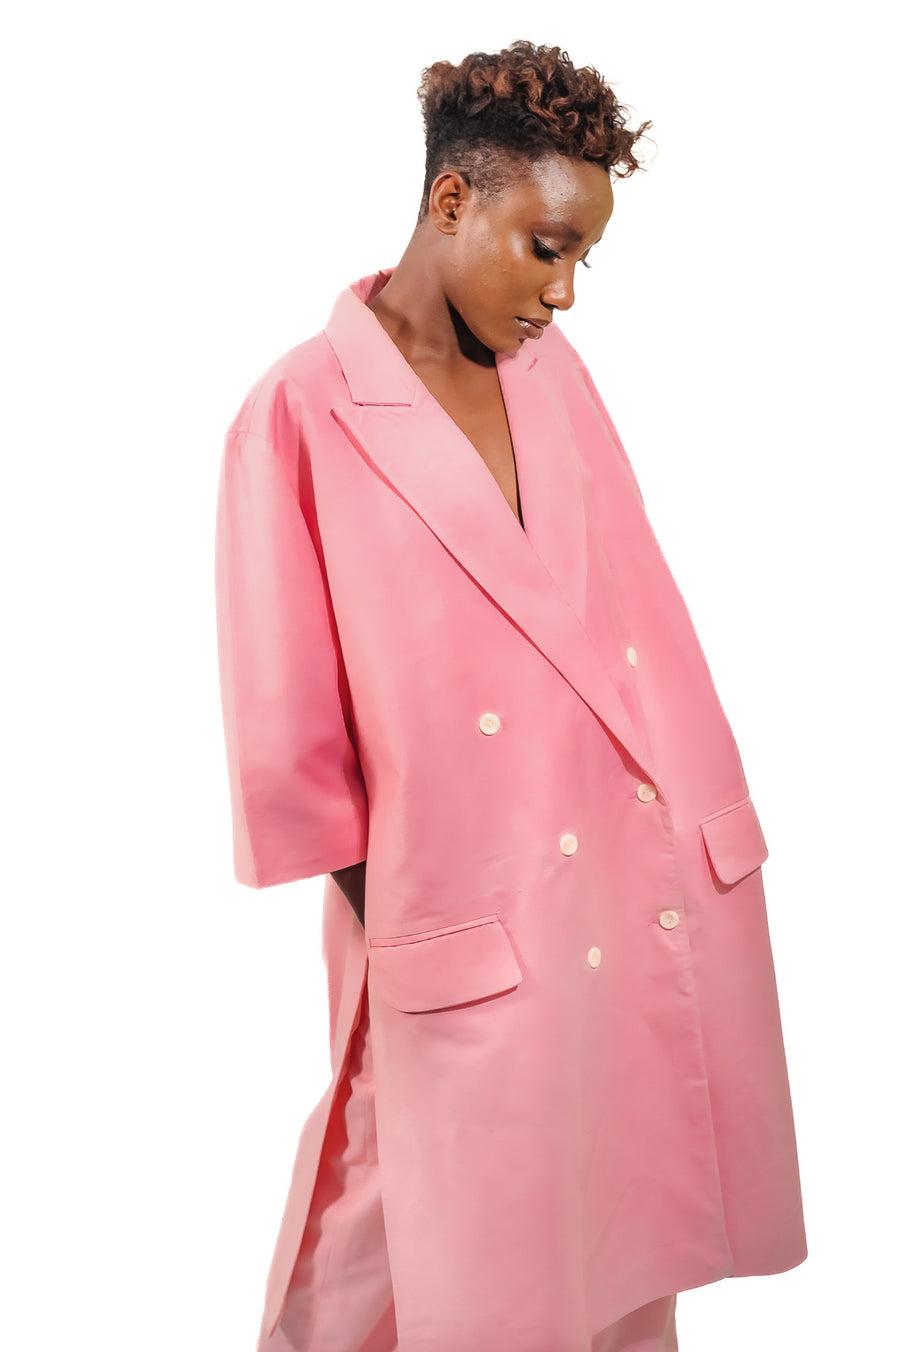 Business Chic double breasted kimono blush-pink suit ADM BASIC